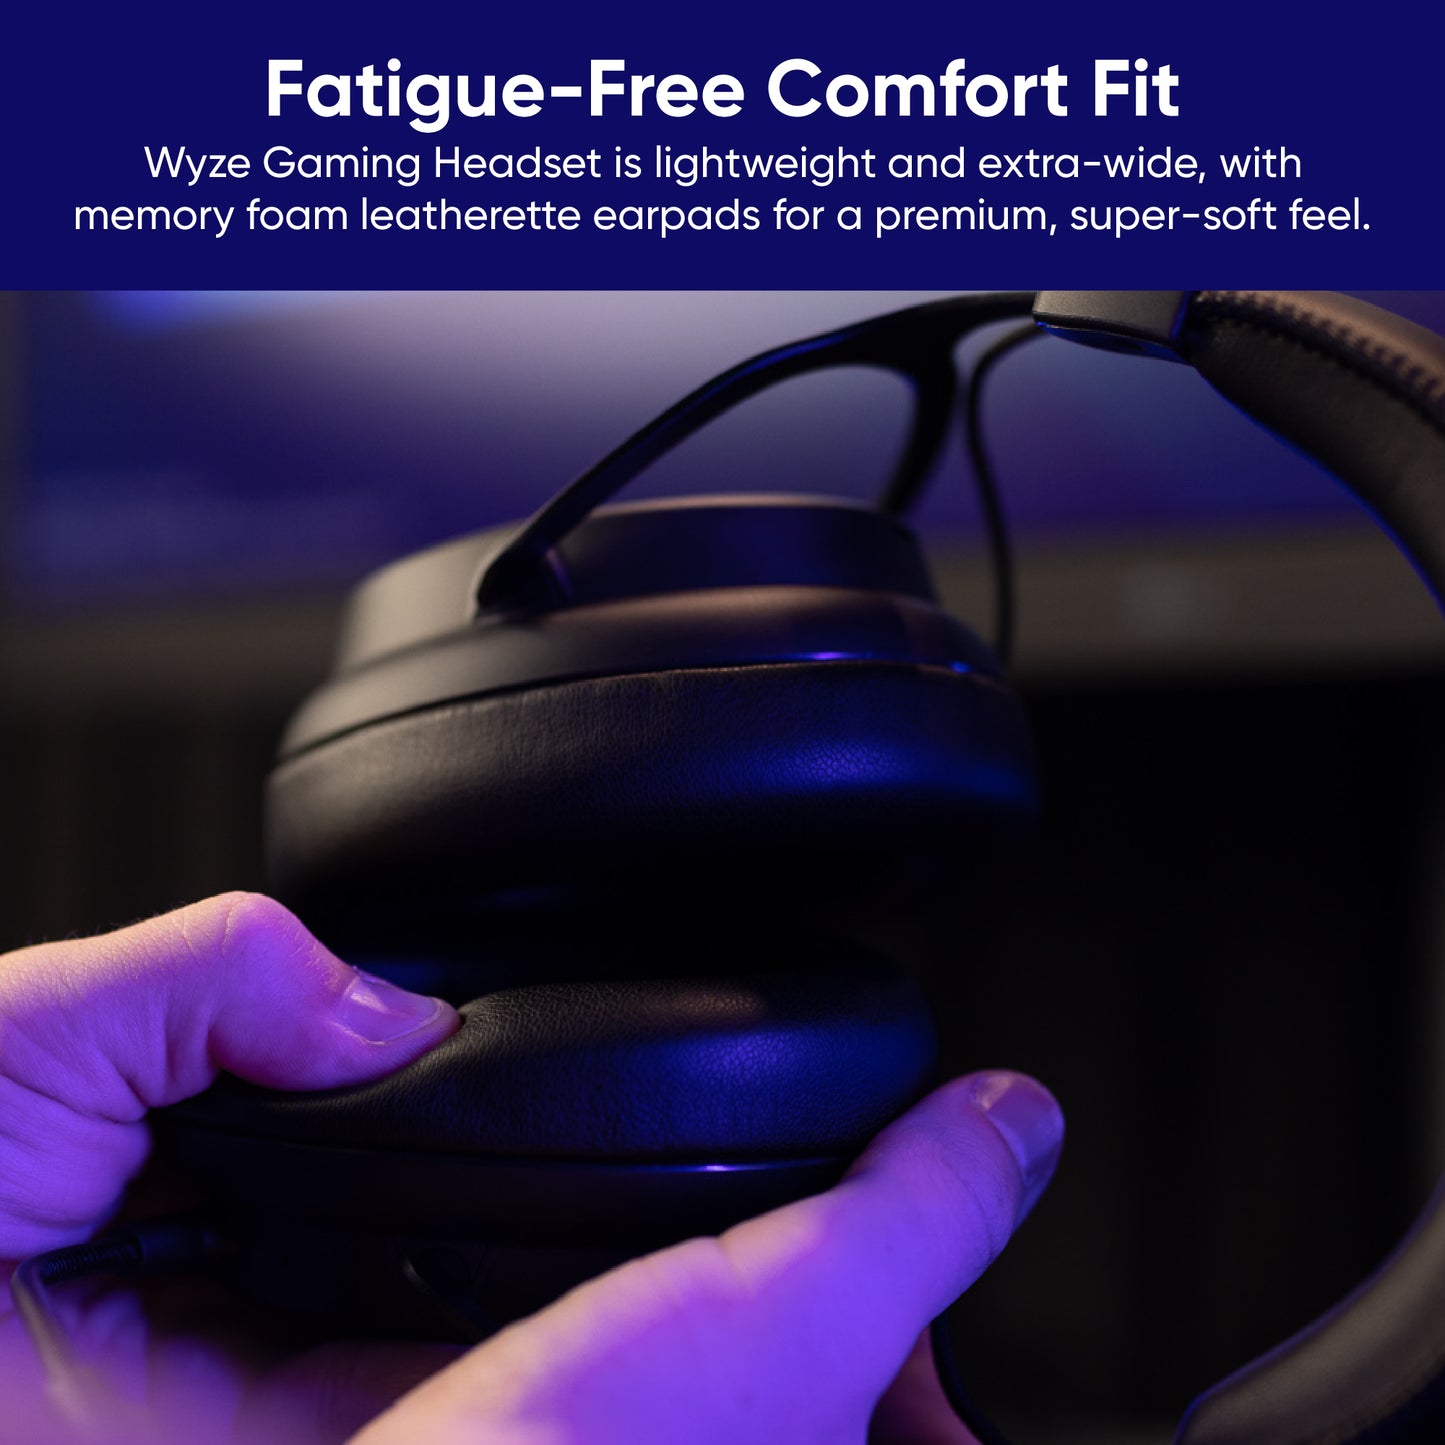 Person holding gaming headset, touching earpads. Text overlay says, "Fatigue free comfort fit, lightweight and extra wide with memory foam leatherette earpads for a premium super soft feel."